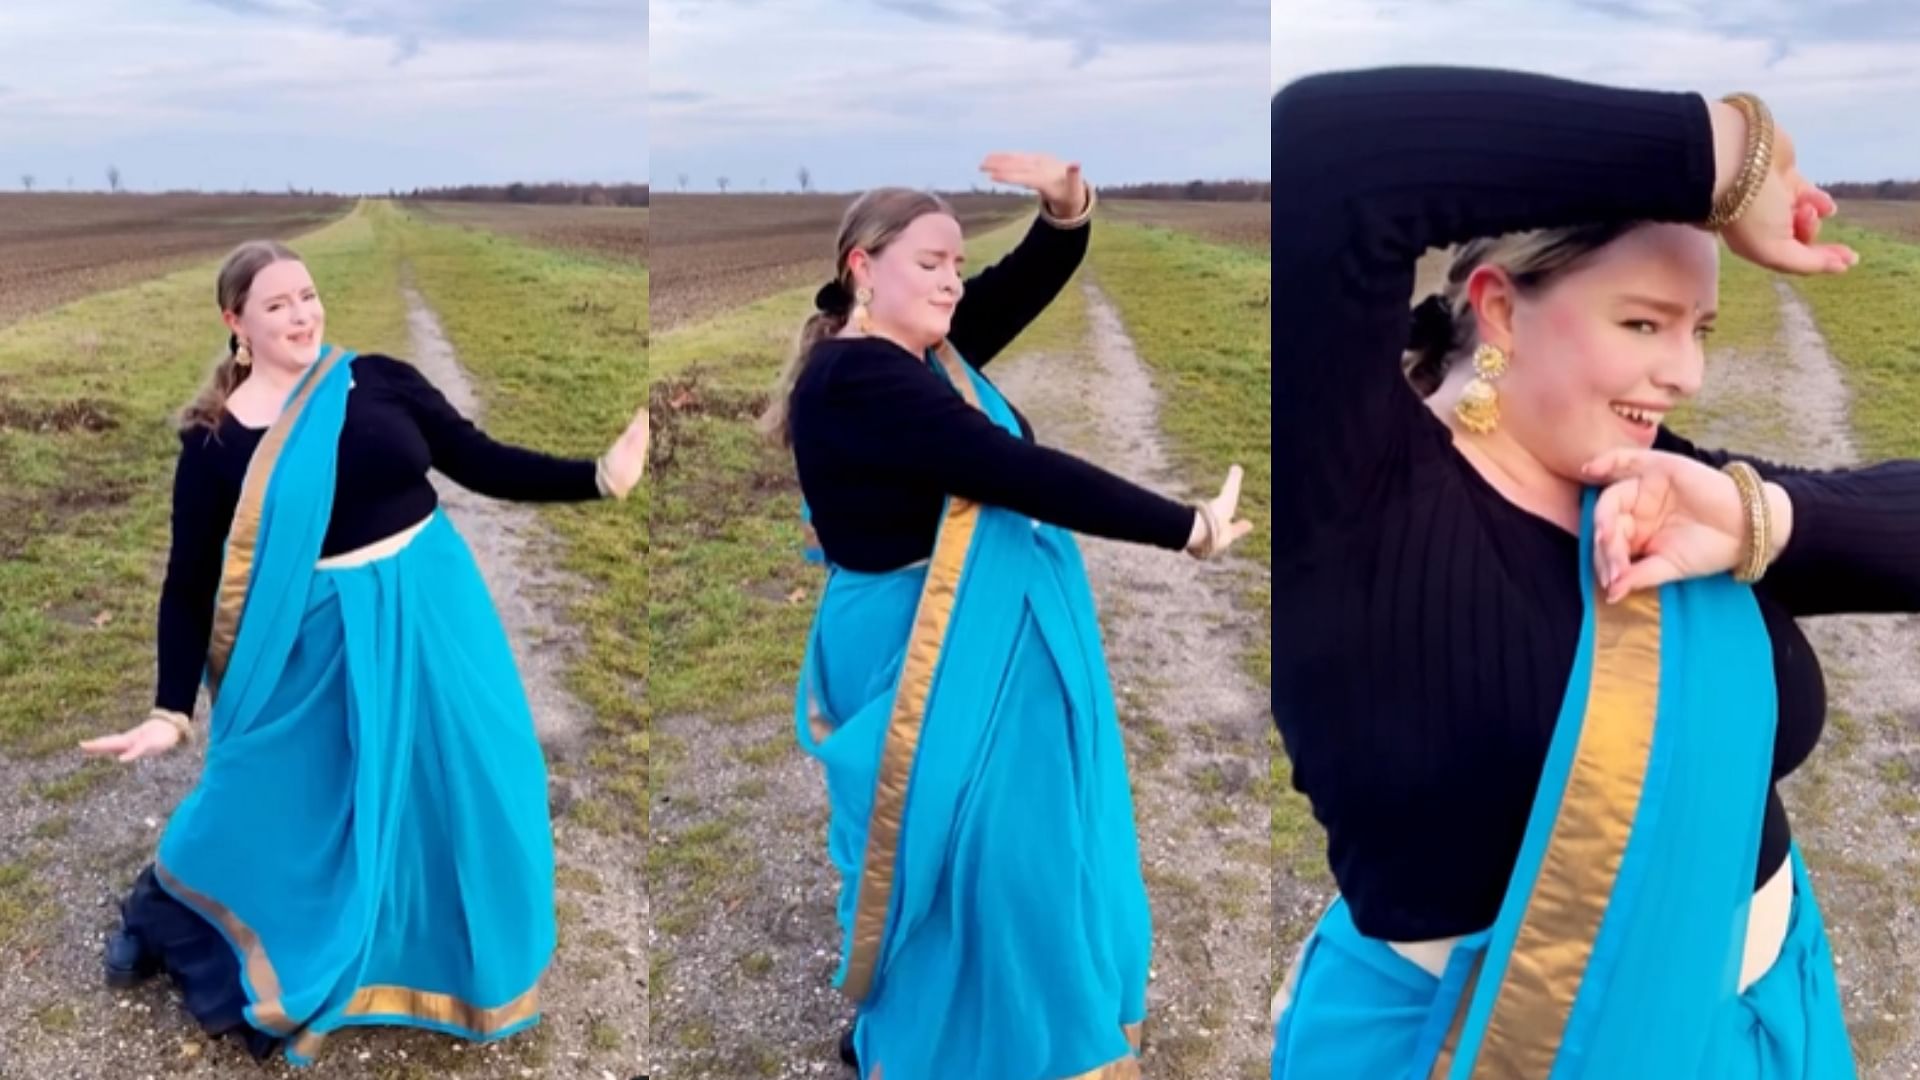 Dance Viral Video: Foreign woman danced on Bollywood songs in saree